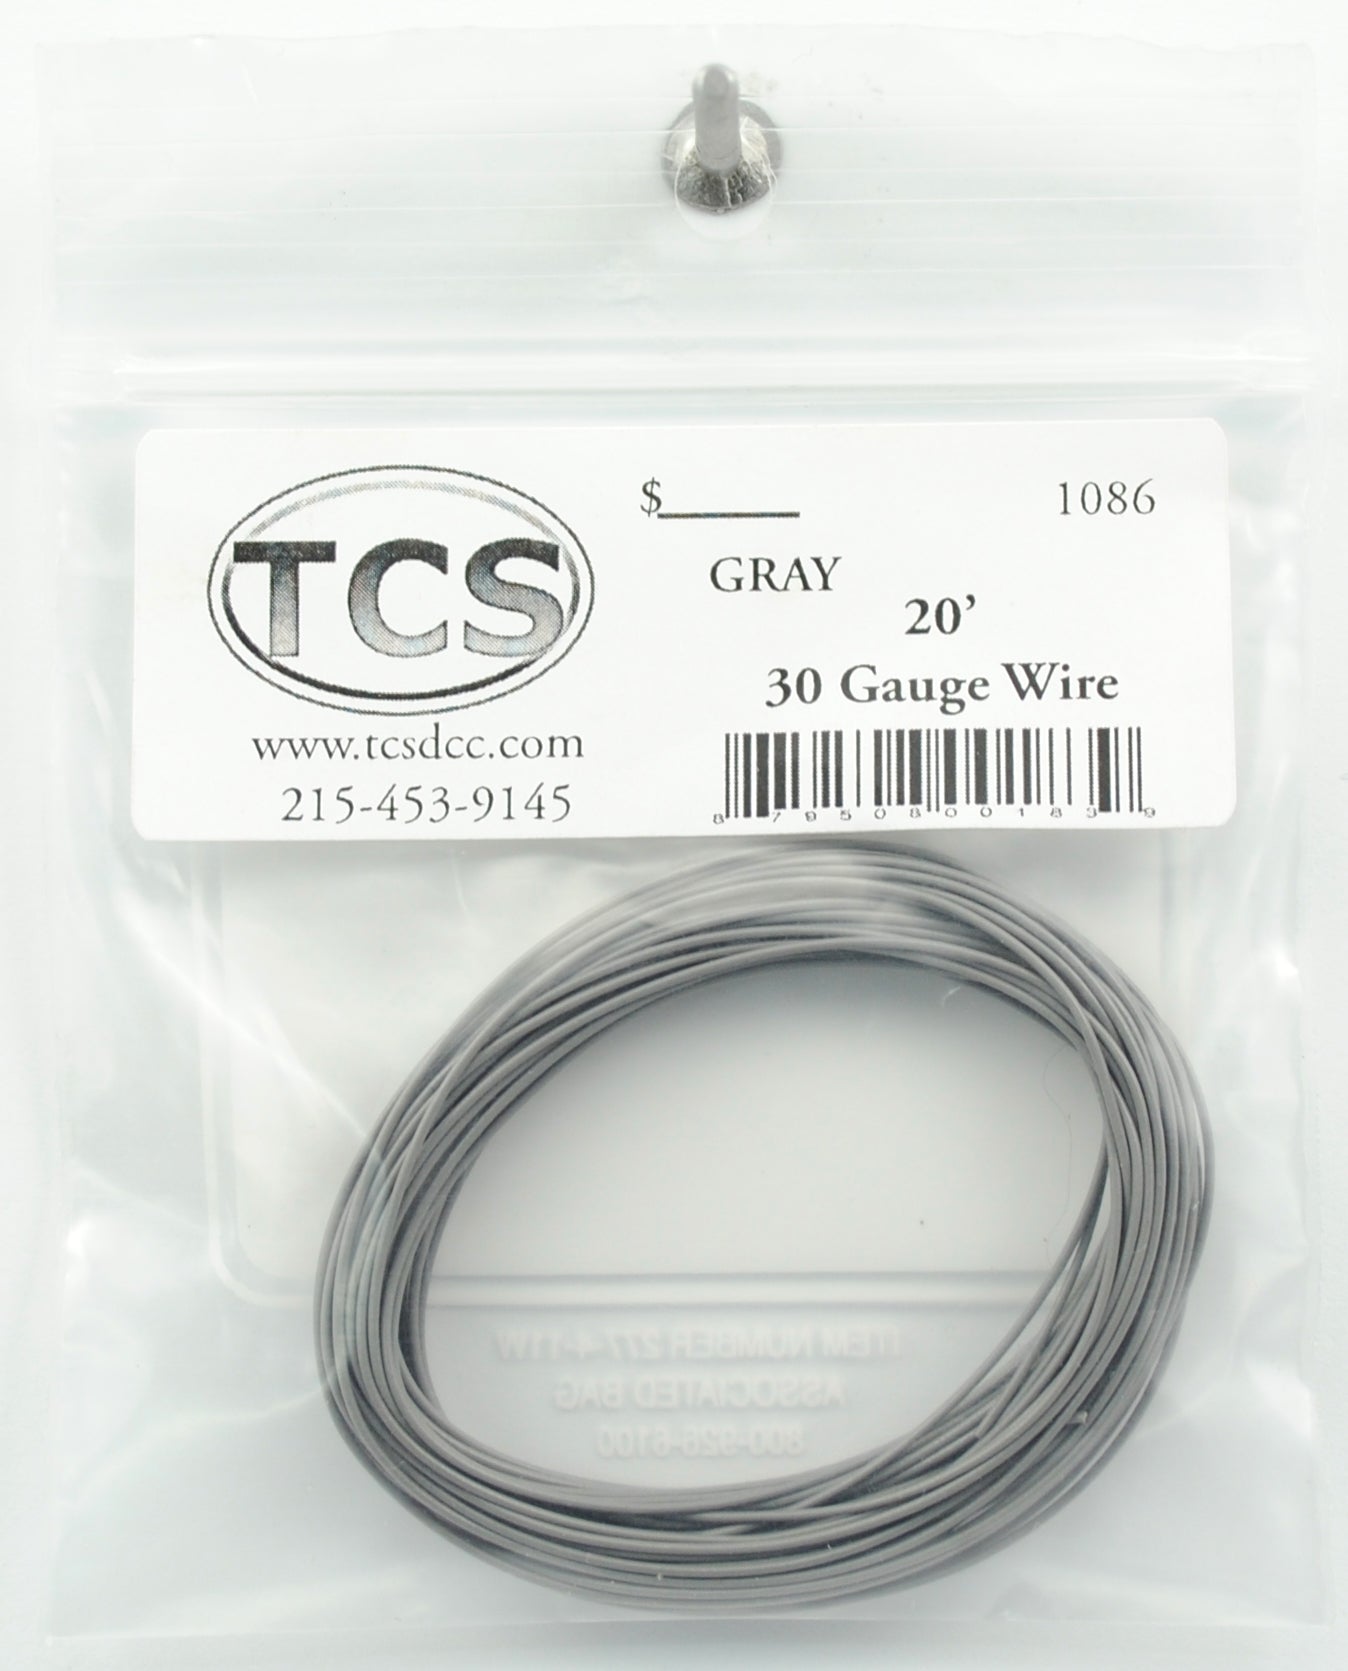 Train Control Systems 1086 Gray 20' of 30 Gauge Wire